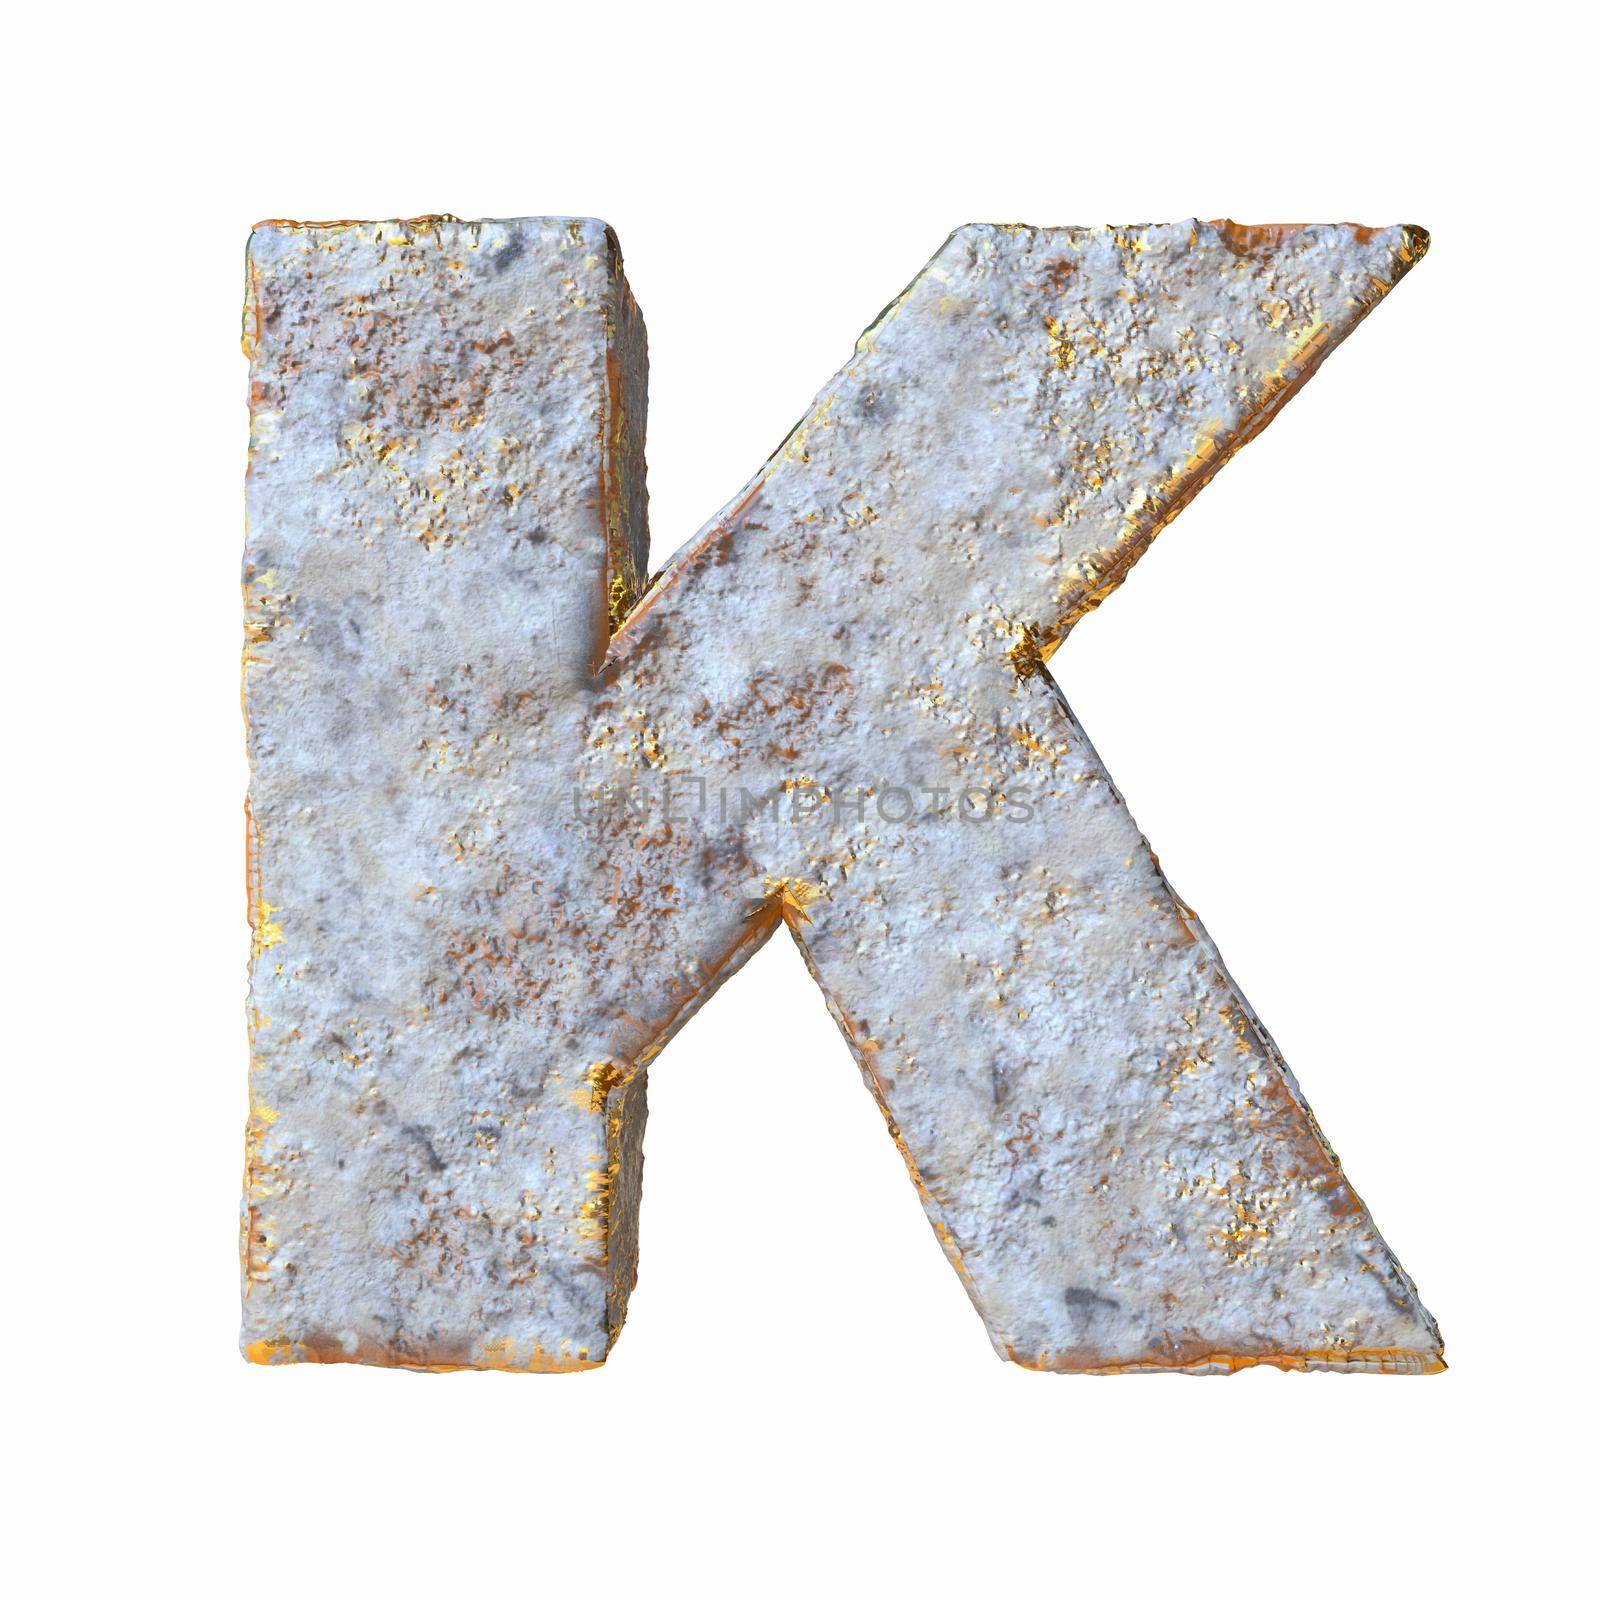 Stone with golden metal particles Letter K 3D by djmilic